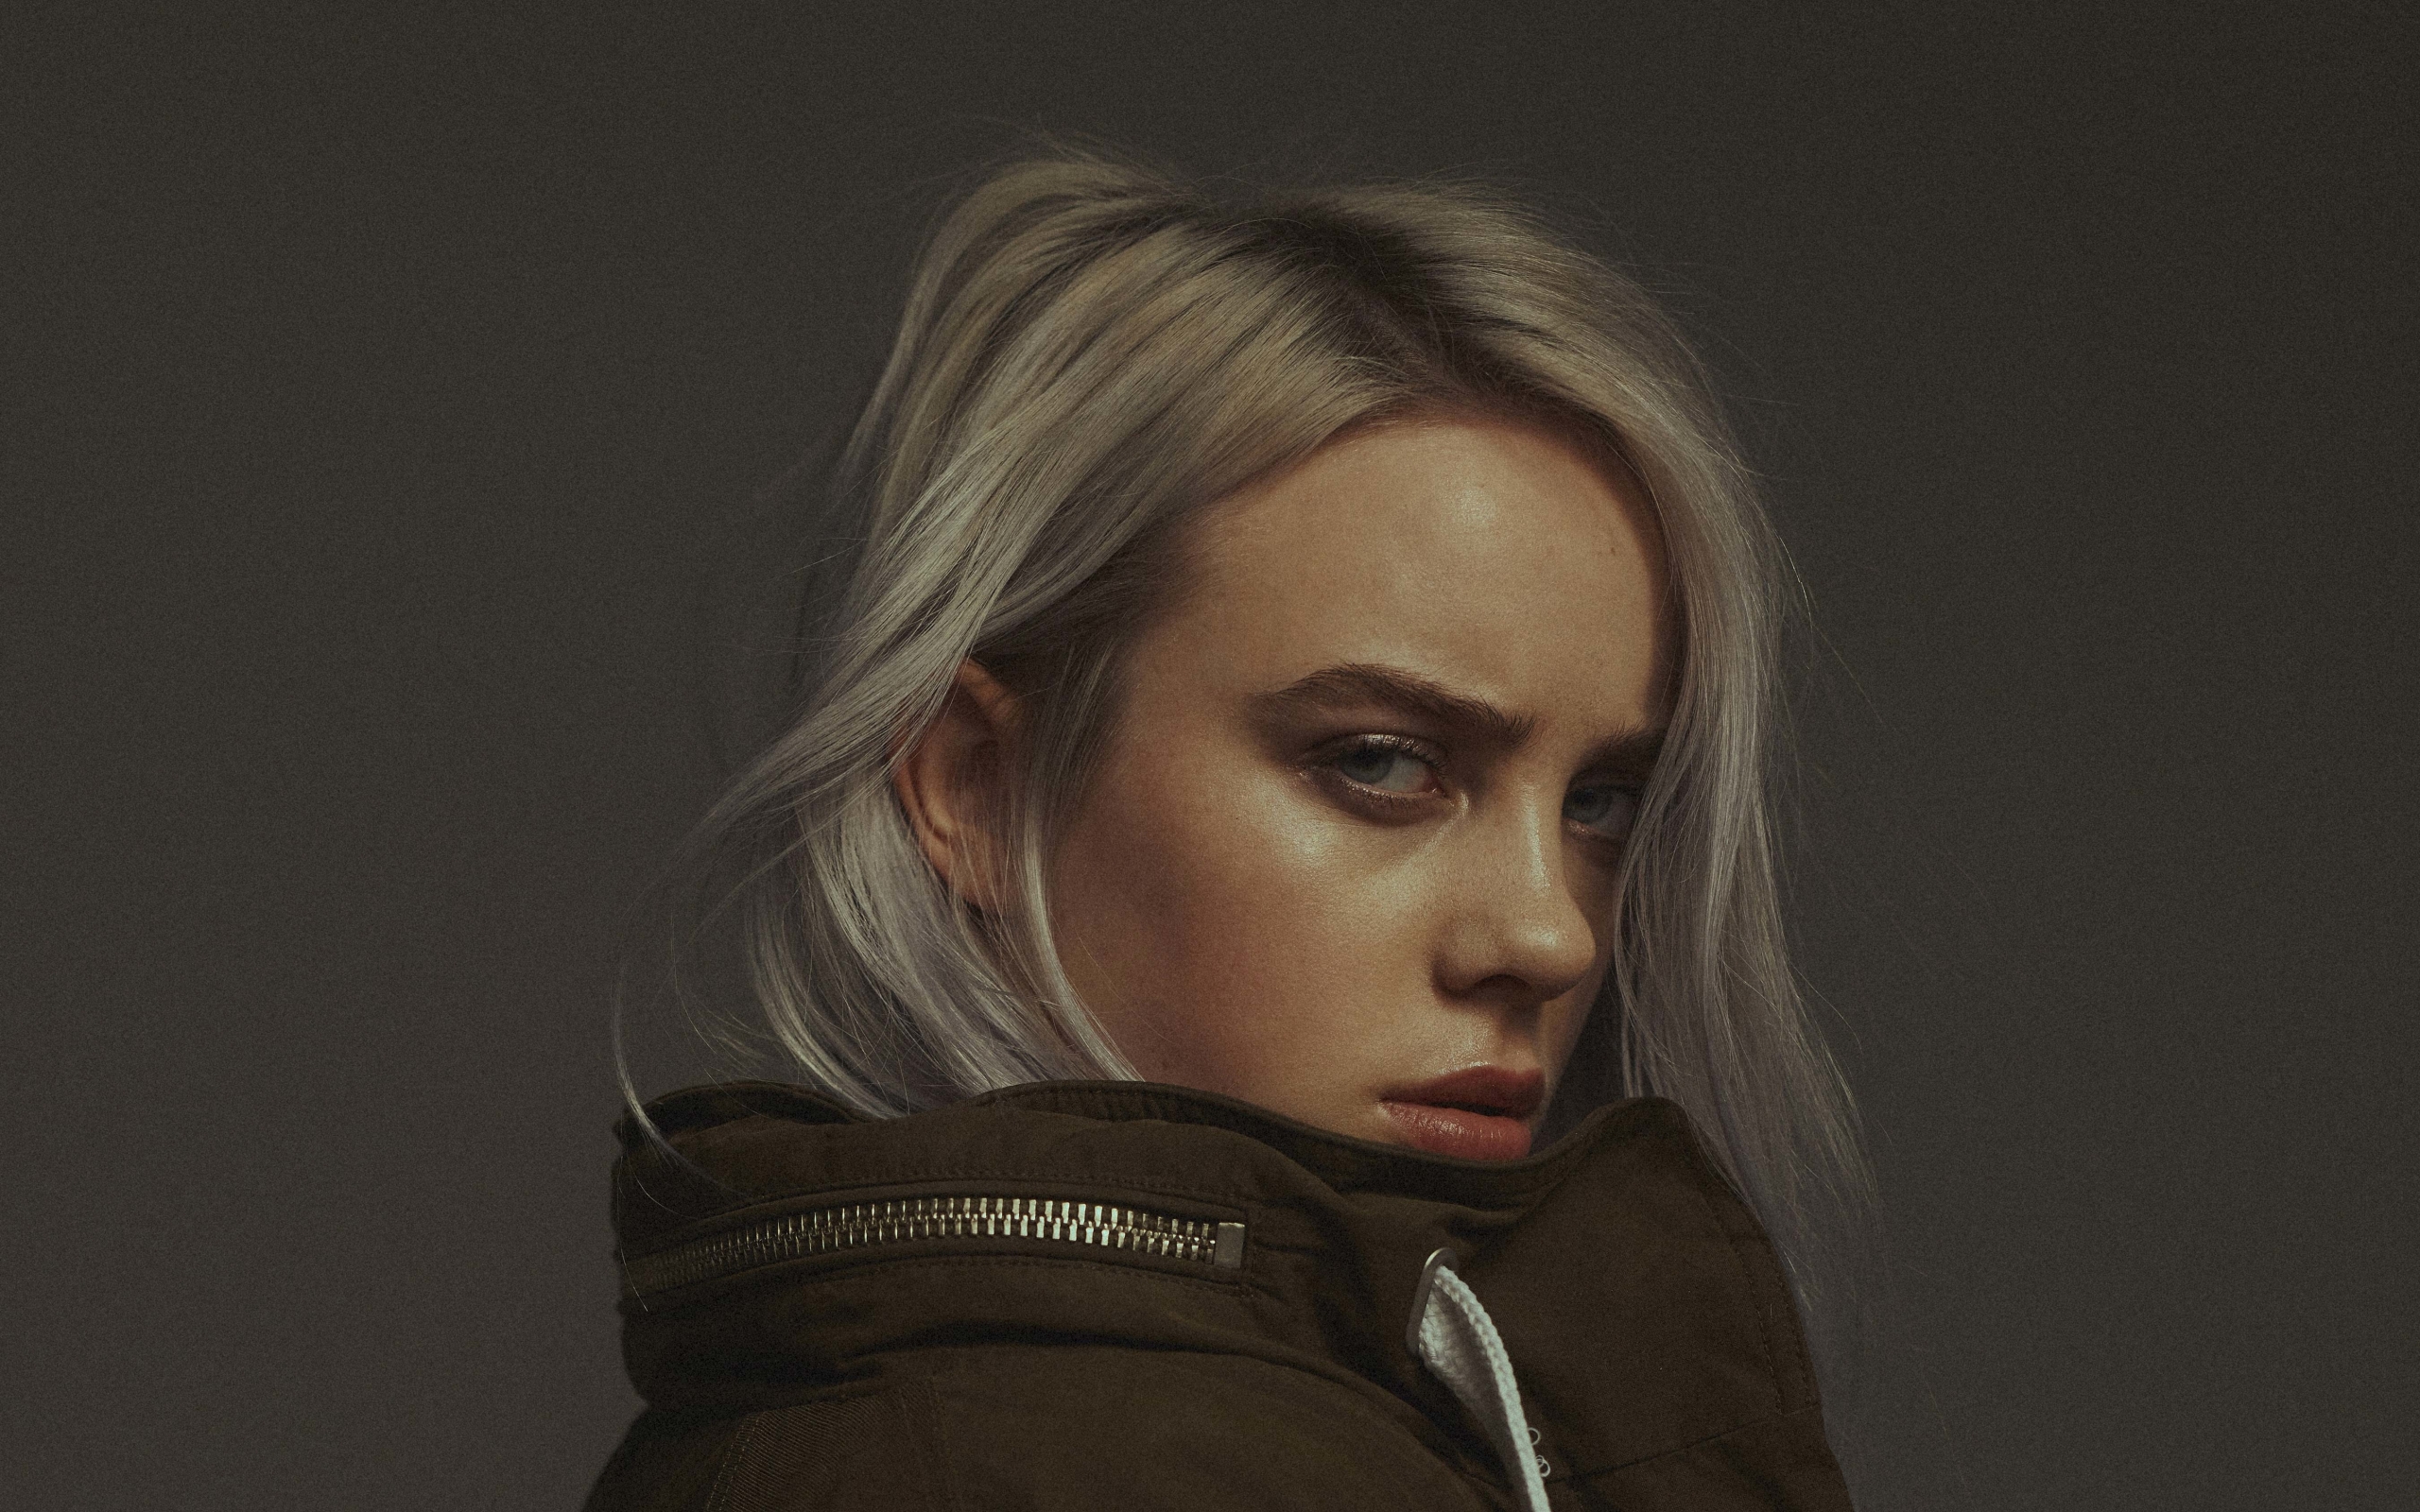 2560x1600 19 Billie Eilish 4k 2560x1600 Resolution Wallpaper Hd Celebrities 4k Wallpapers Images Photos And Background